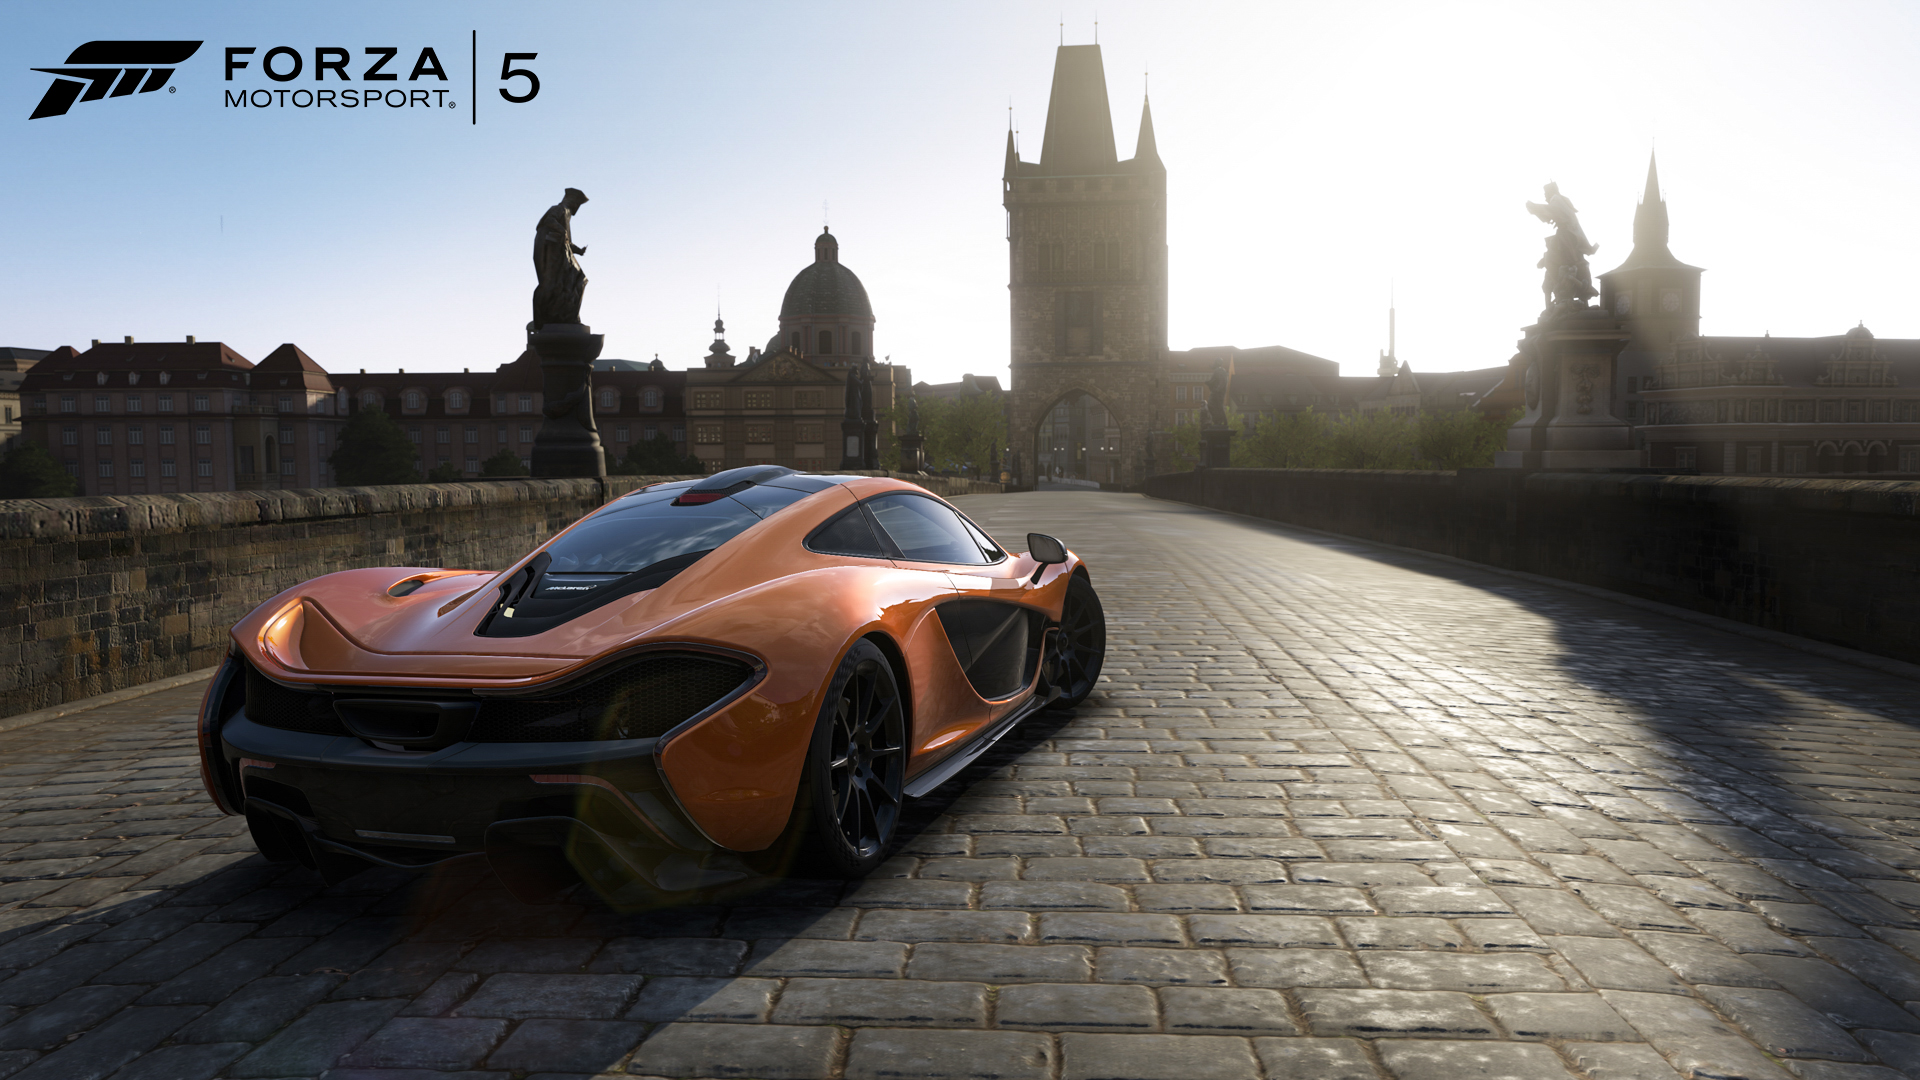 Metal Made Beautiful: My Hour With Forza Motorsport 5 - GameSpot